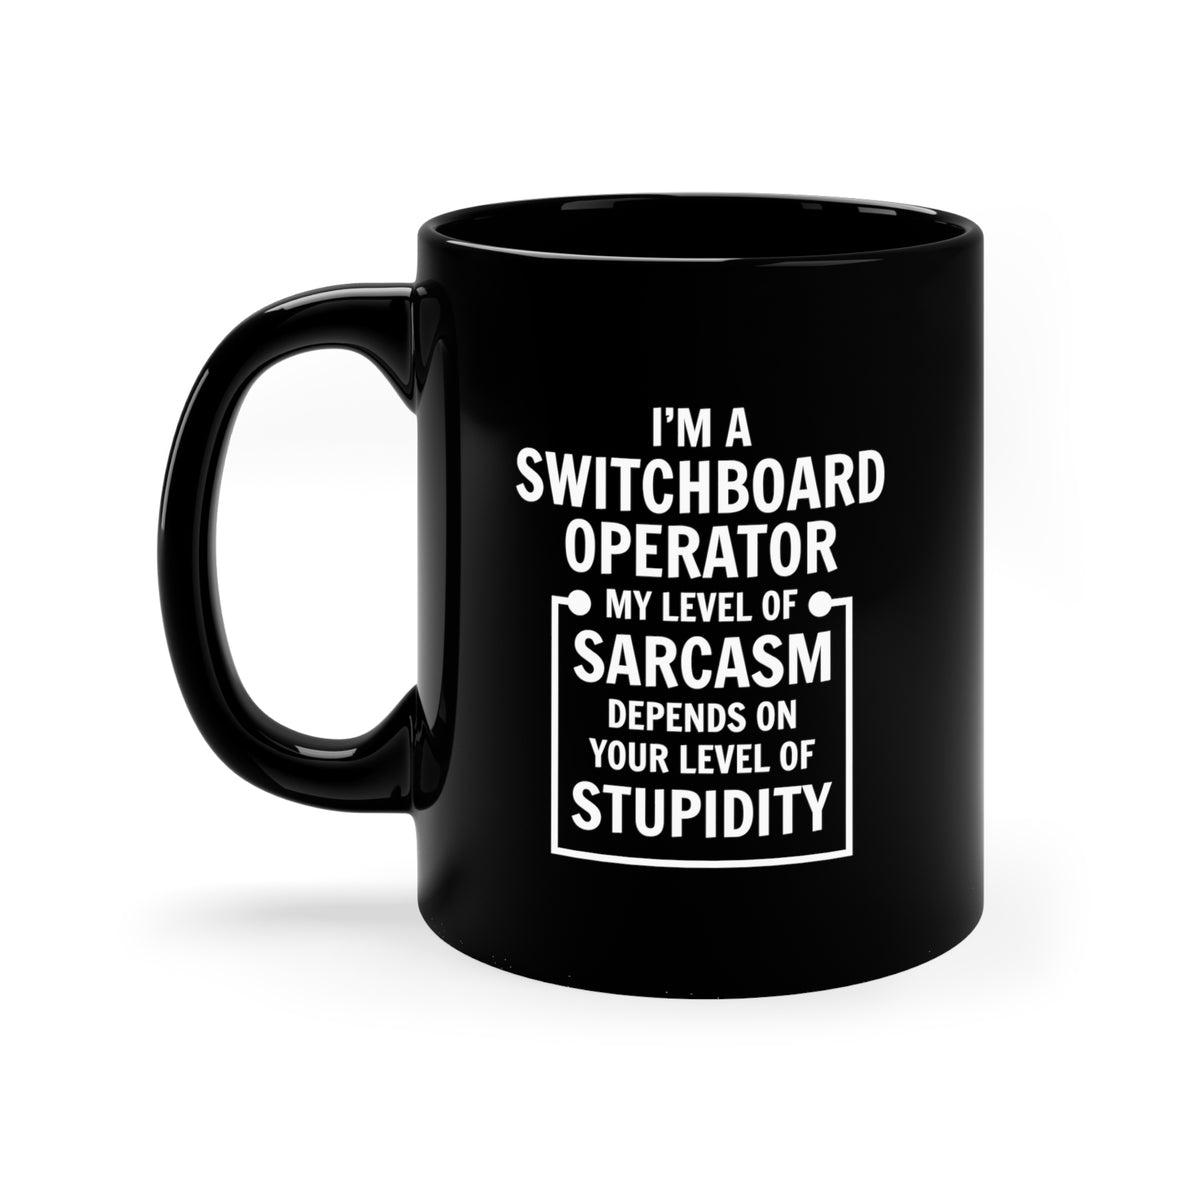 Switchboard operator Black Coffee Mug - My Level of Sarcasm - Birthday, Christmas Gifts For Switchboard operator Coworkers, Colleagues, Men, Women, Mom, Dad